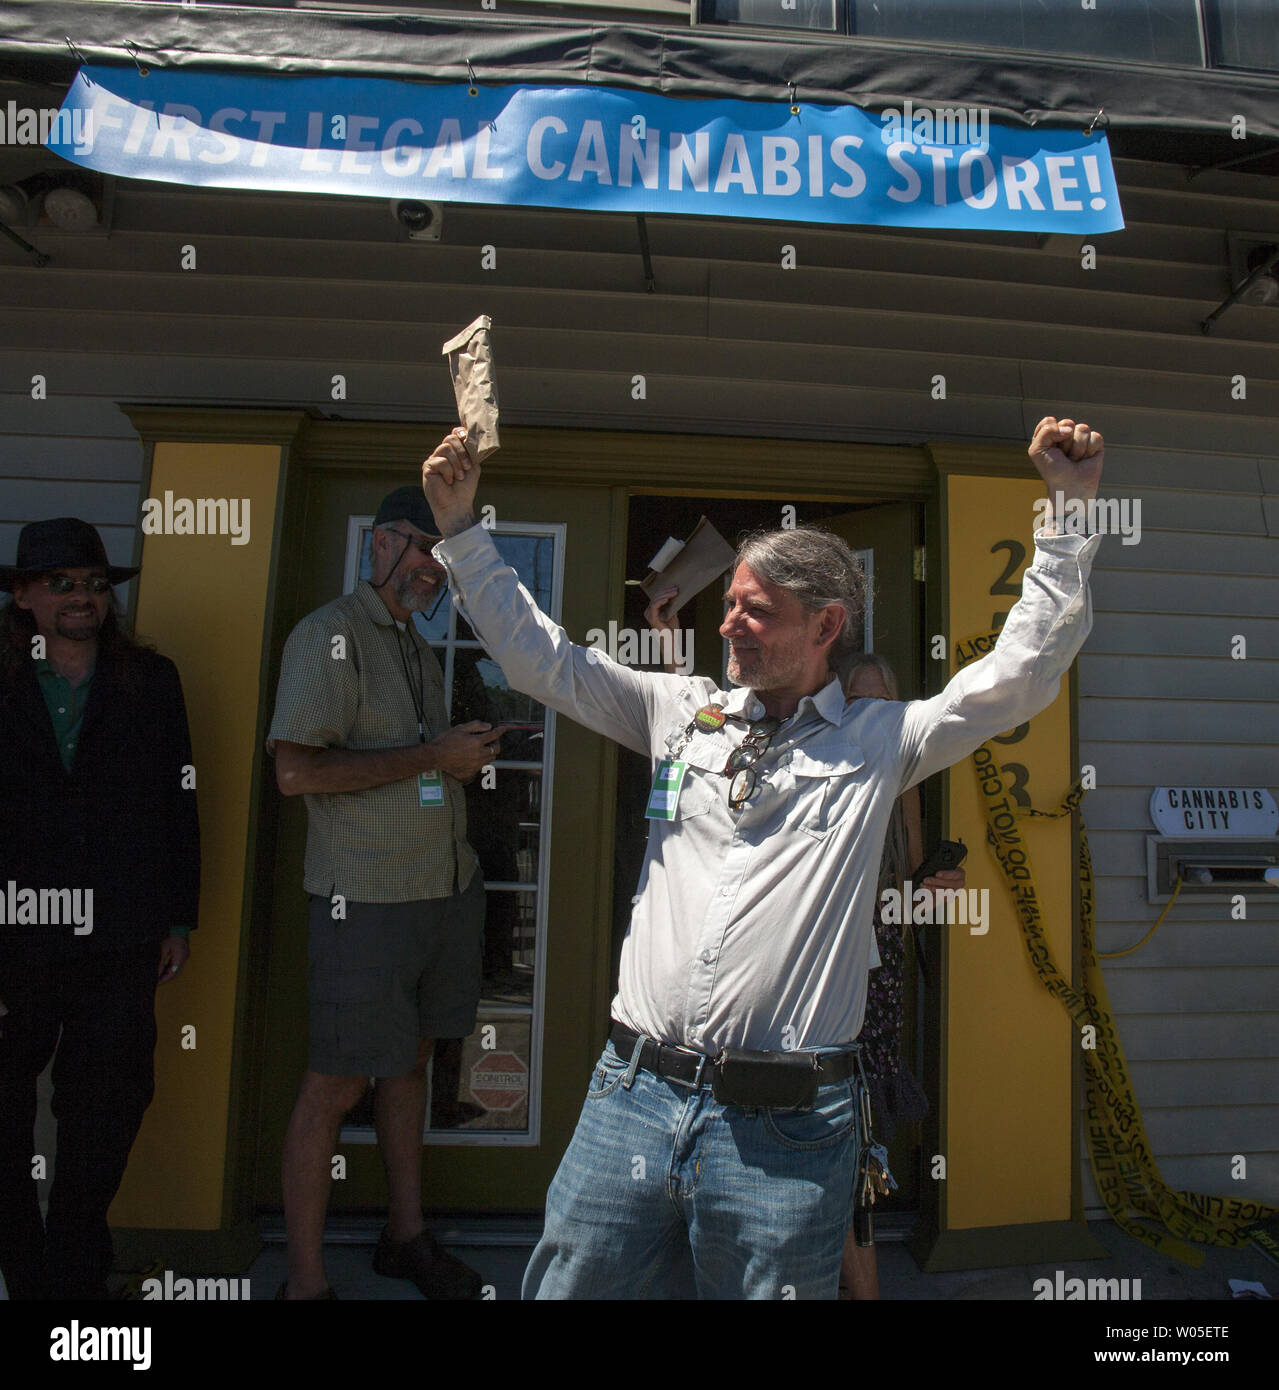 Steve McPeak, Seattle's Hemp Fest organizer, holds up his bag of marijunana purchased in Cabannis City, WashingtonÕs first recreational marijuana stores that open July, 8, 2014 in Seattle.  Owner James Lathrop expects to sell all 10 pounds of pot at $15 to $20 per gram. Lathrop and his business manager had been working as many as 16 hours a day to prepare the business for its first customers. He said Cannabis City passed its two-hour state inspection last week.  UPI/Jim Bryant ...................................................................................................................... Stock Photo